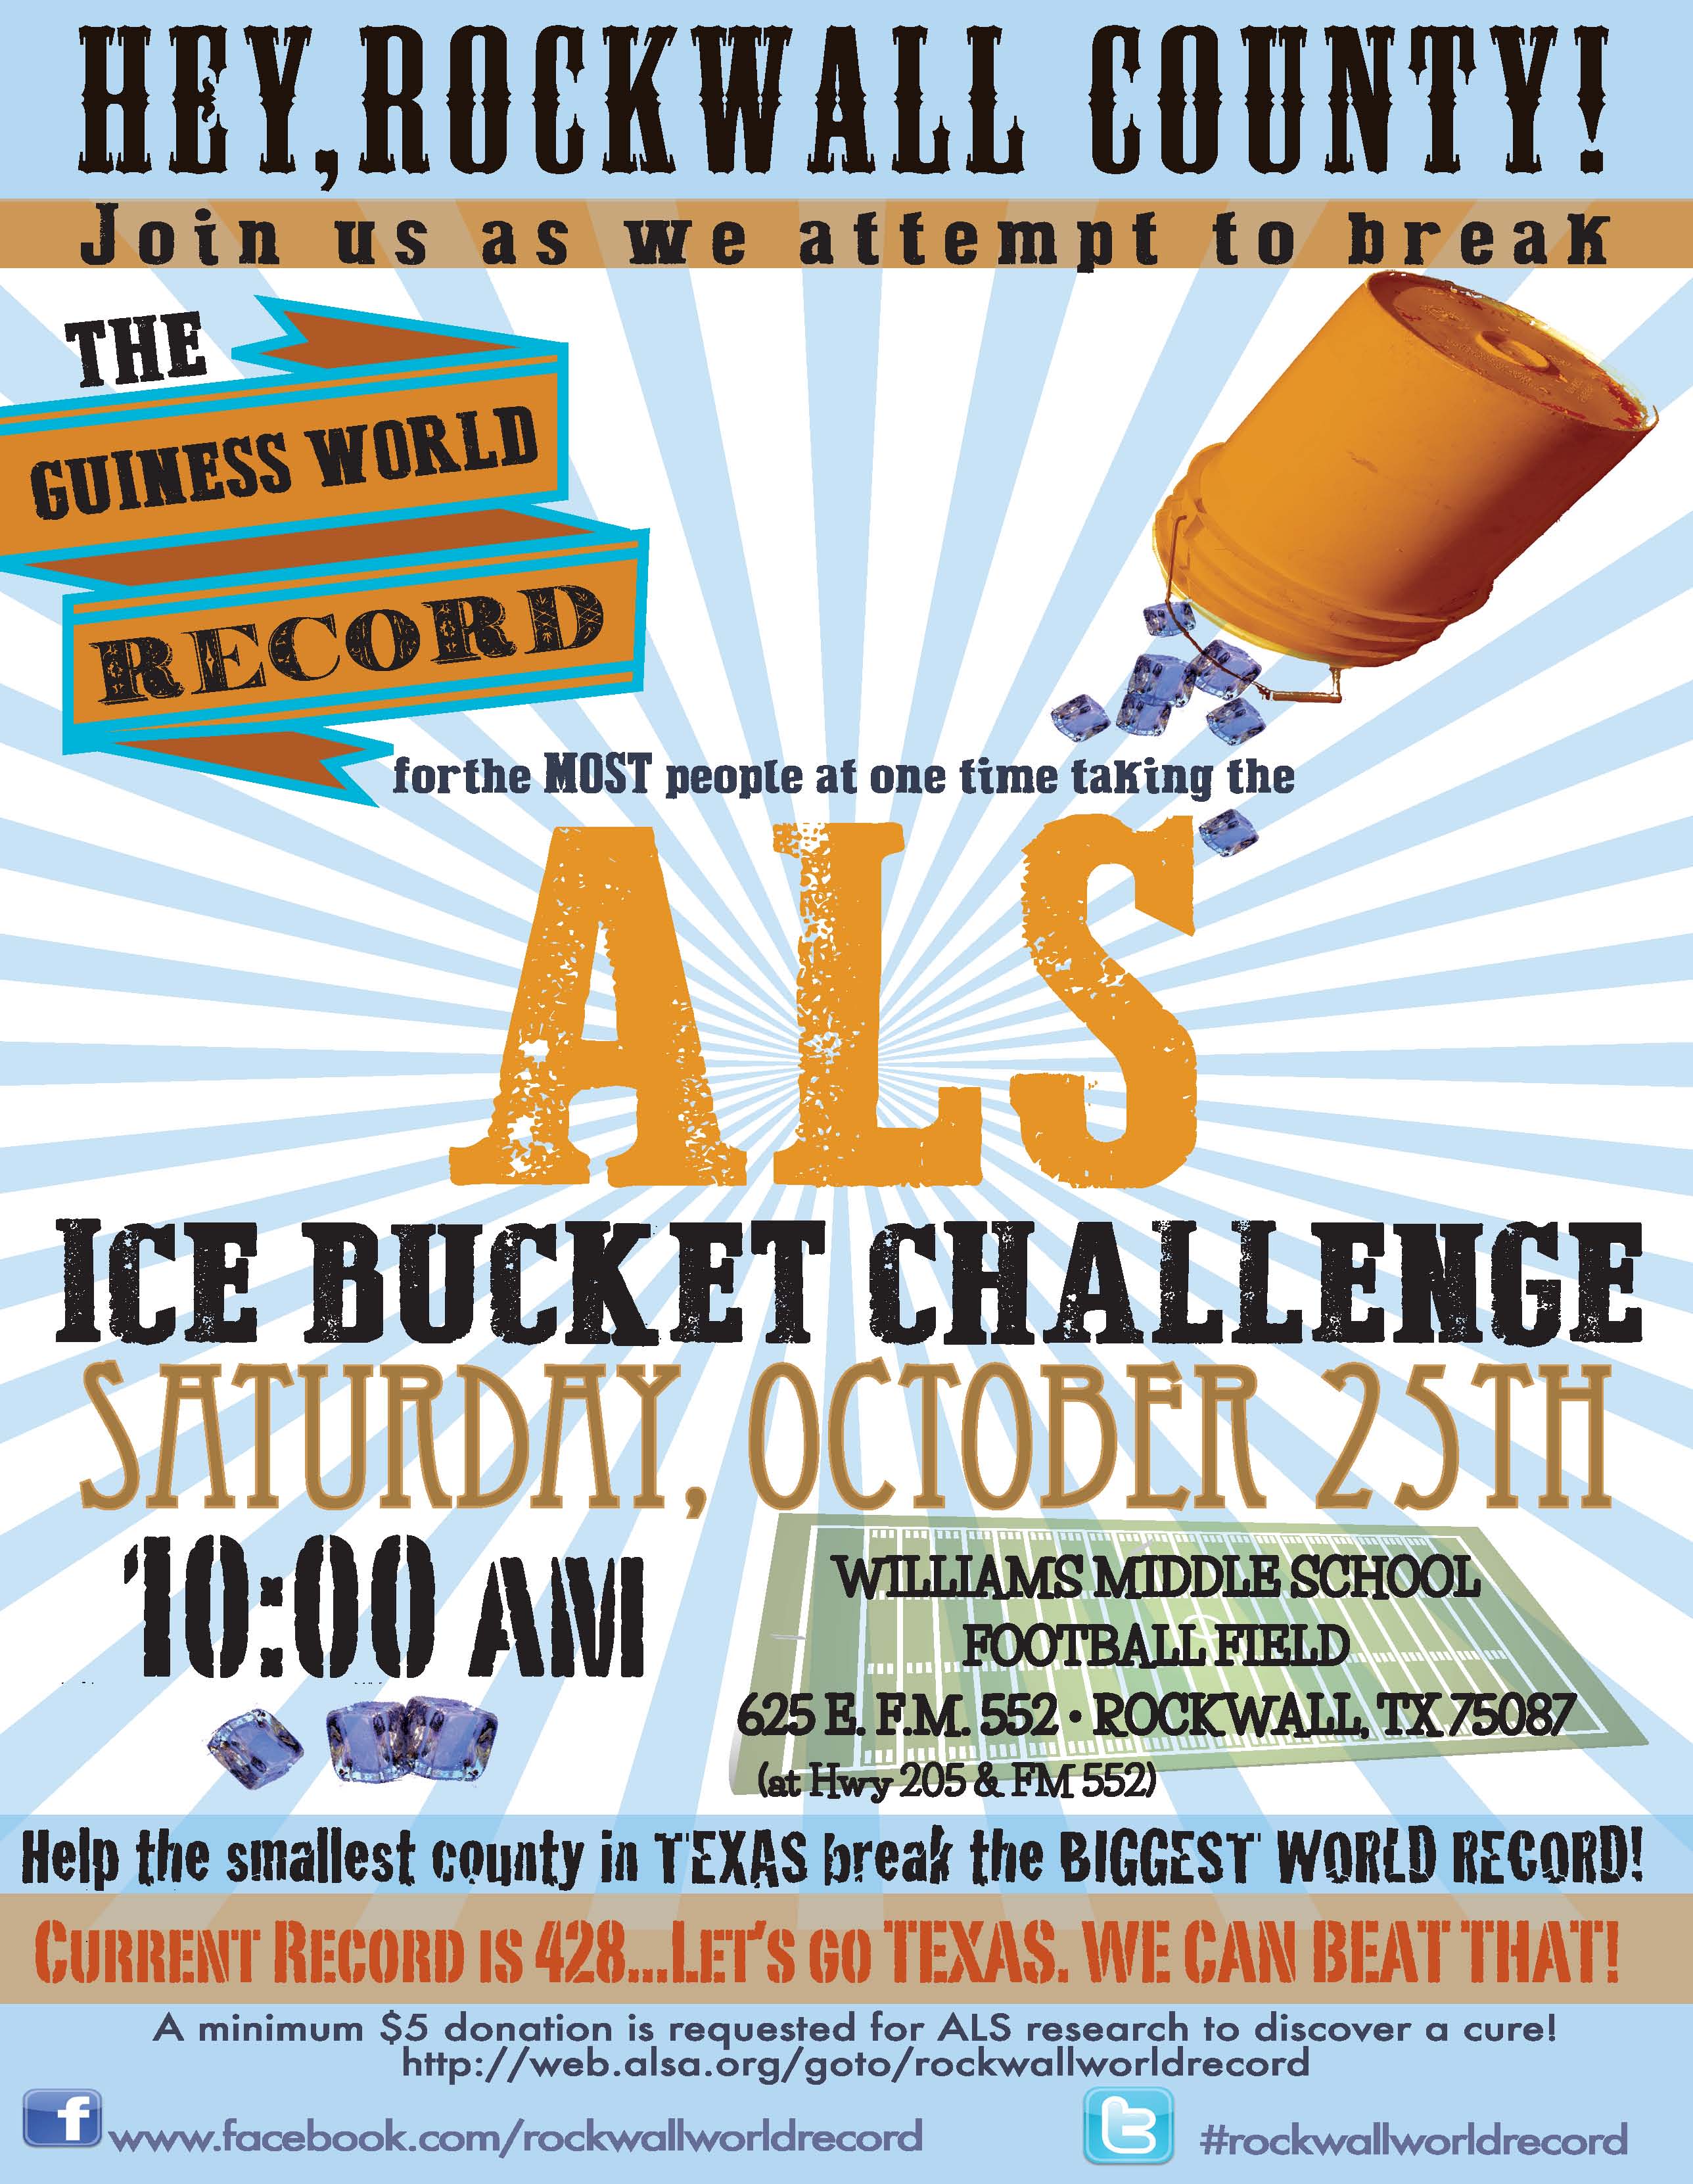 Ice bucket challenge in Rockwall Saturday aims to set world record